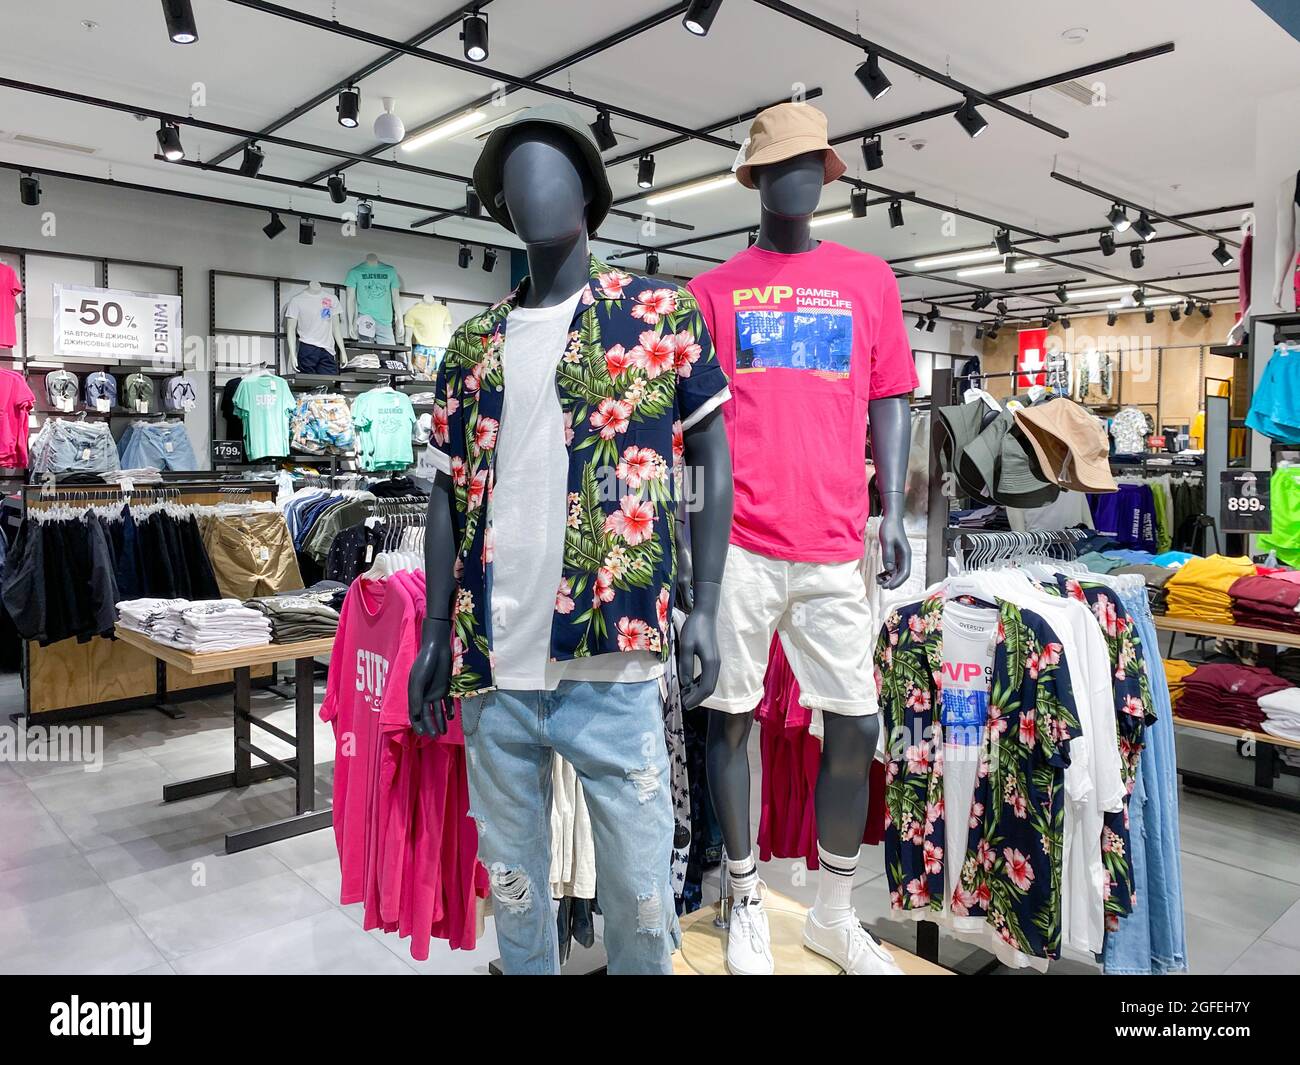 Moscow, Russia, June 2021: Men's Clothing Department. Two male mannequins in T-shirts, shorts, a Hawaiian shirt. Shelves with casual-style clothes are Stock Photo